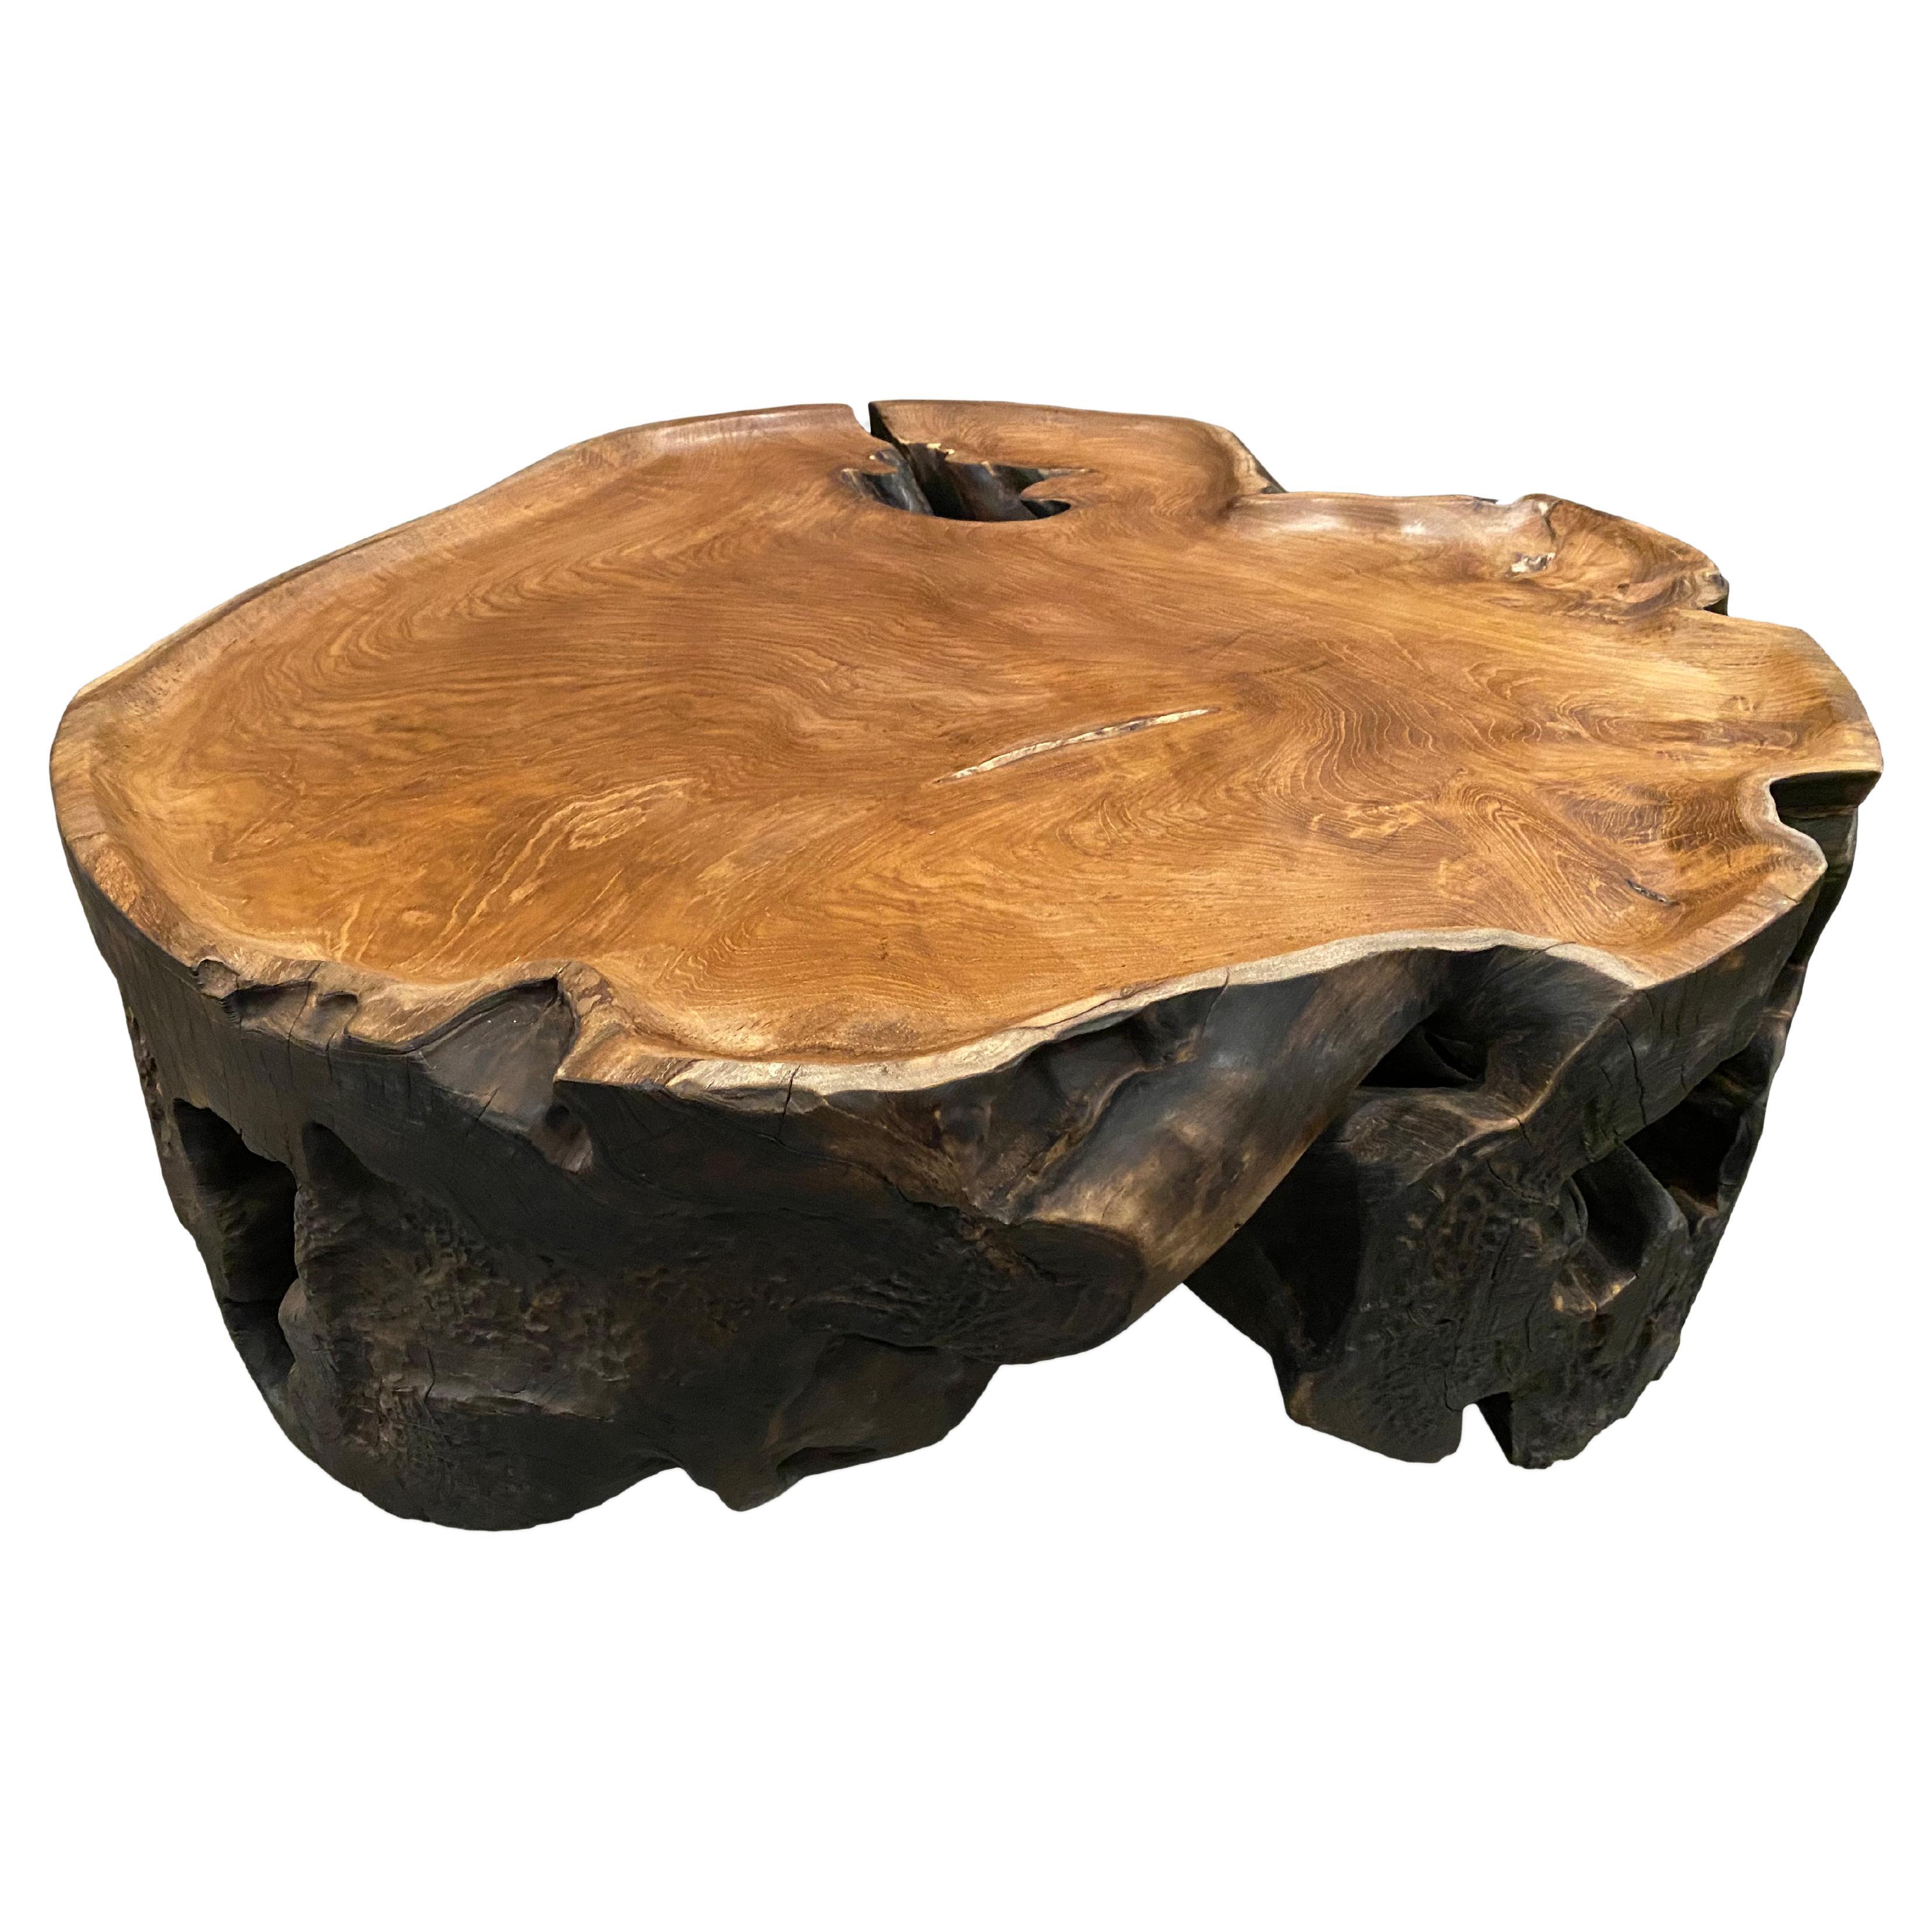 Organic reclaimed teak root coffee table. The sides are hammered and charred one time in contrast to the top which is smooth natural teak. We hand carved the top section into a tray style and polished the aged teak with a natural oil finish exposing